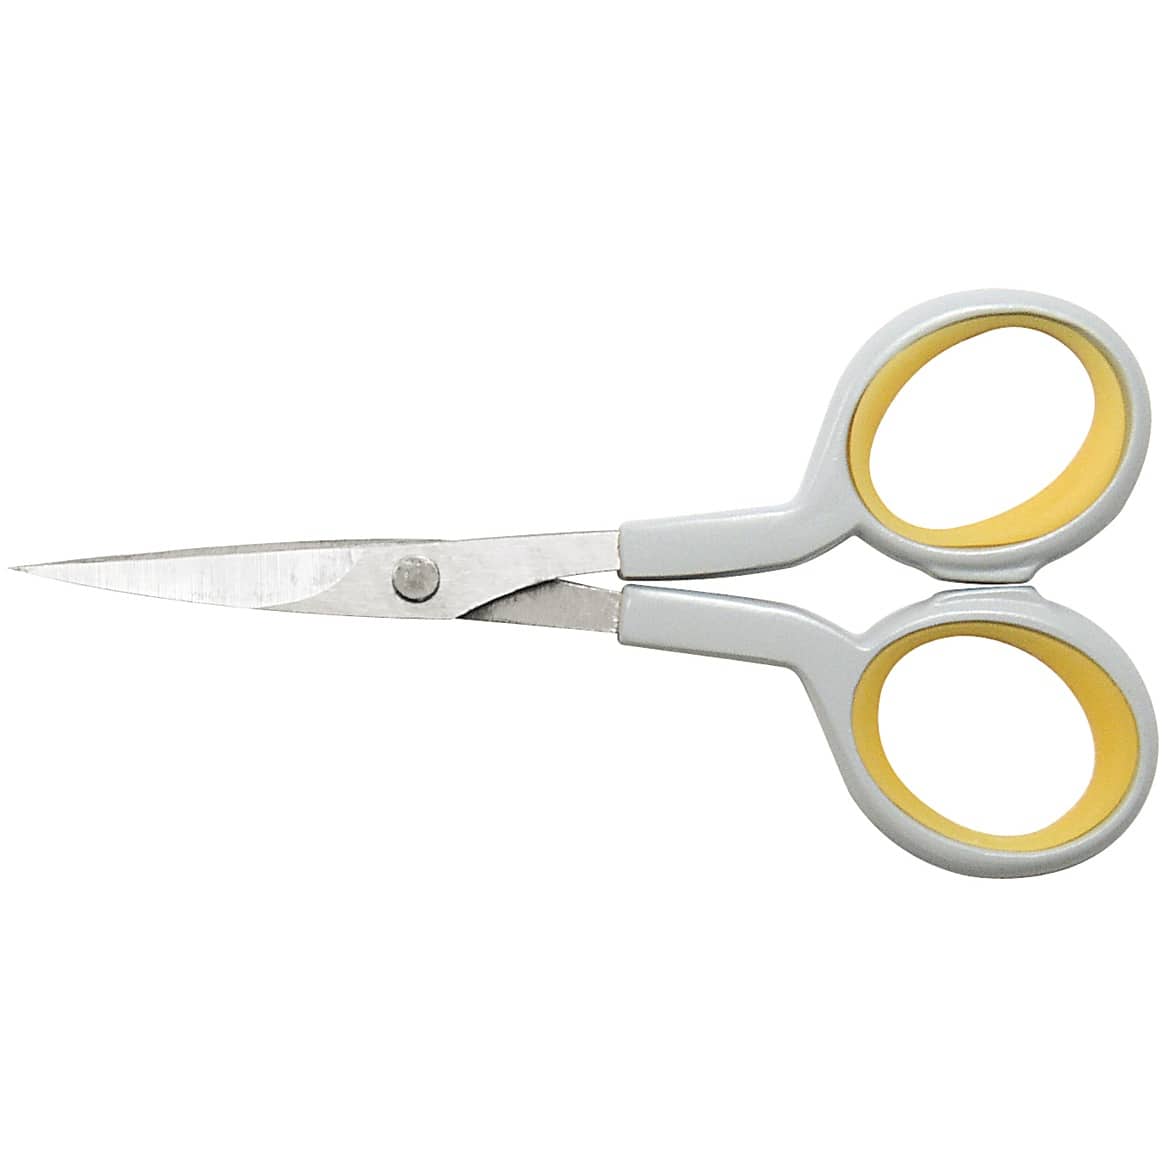 Westcott 16380-001 4 Curved Blade Titanium Embroidery Scissors for Crafting,  Wh